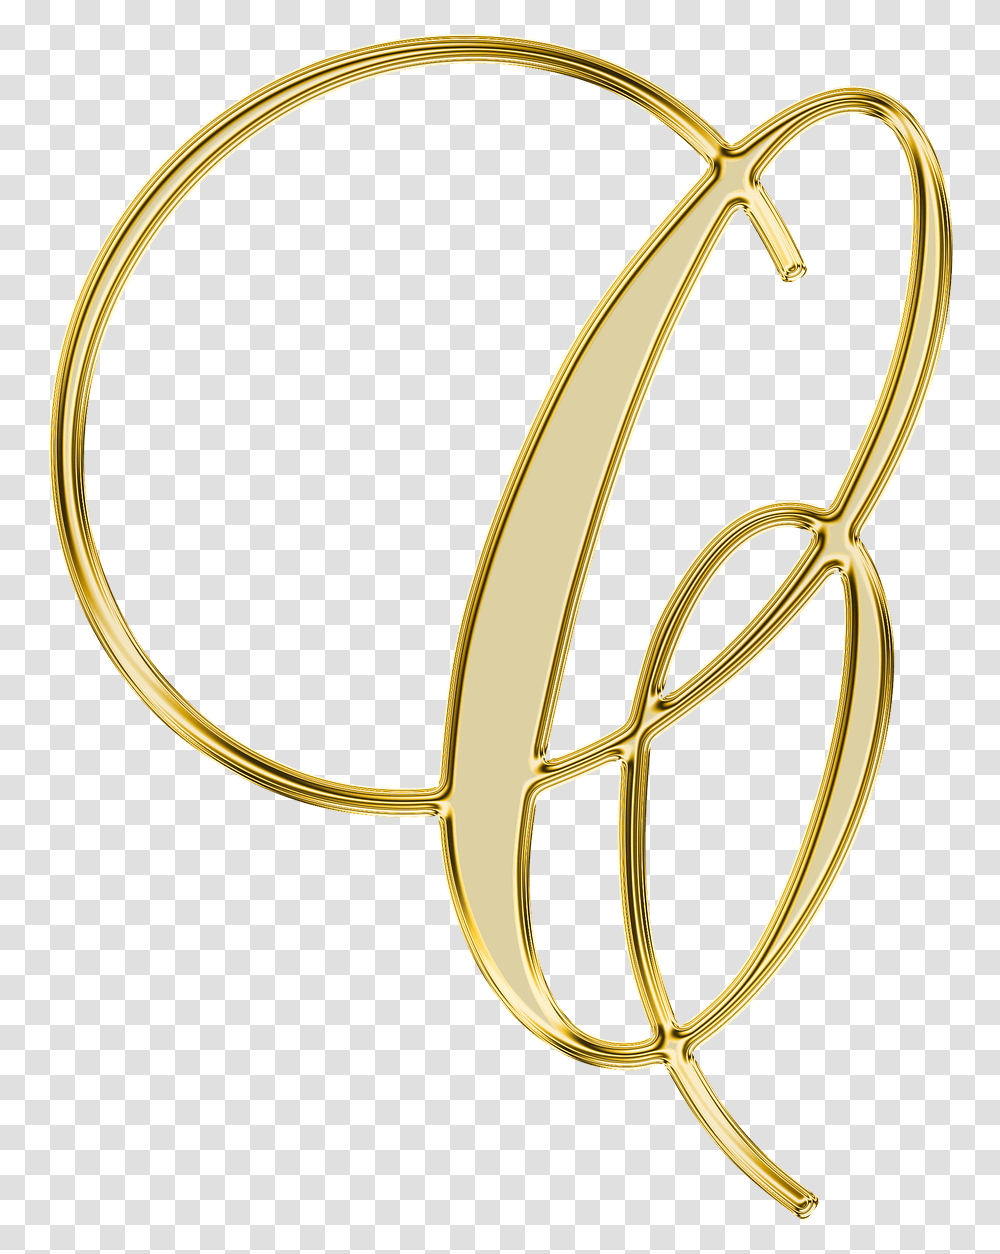 C Letter Letter C With Background, Accessories, Accessory, Jewelry, Sunglasses Transparent Png